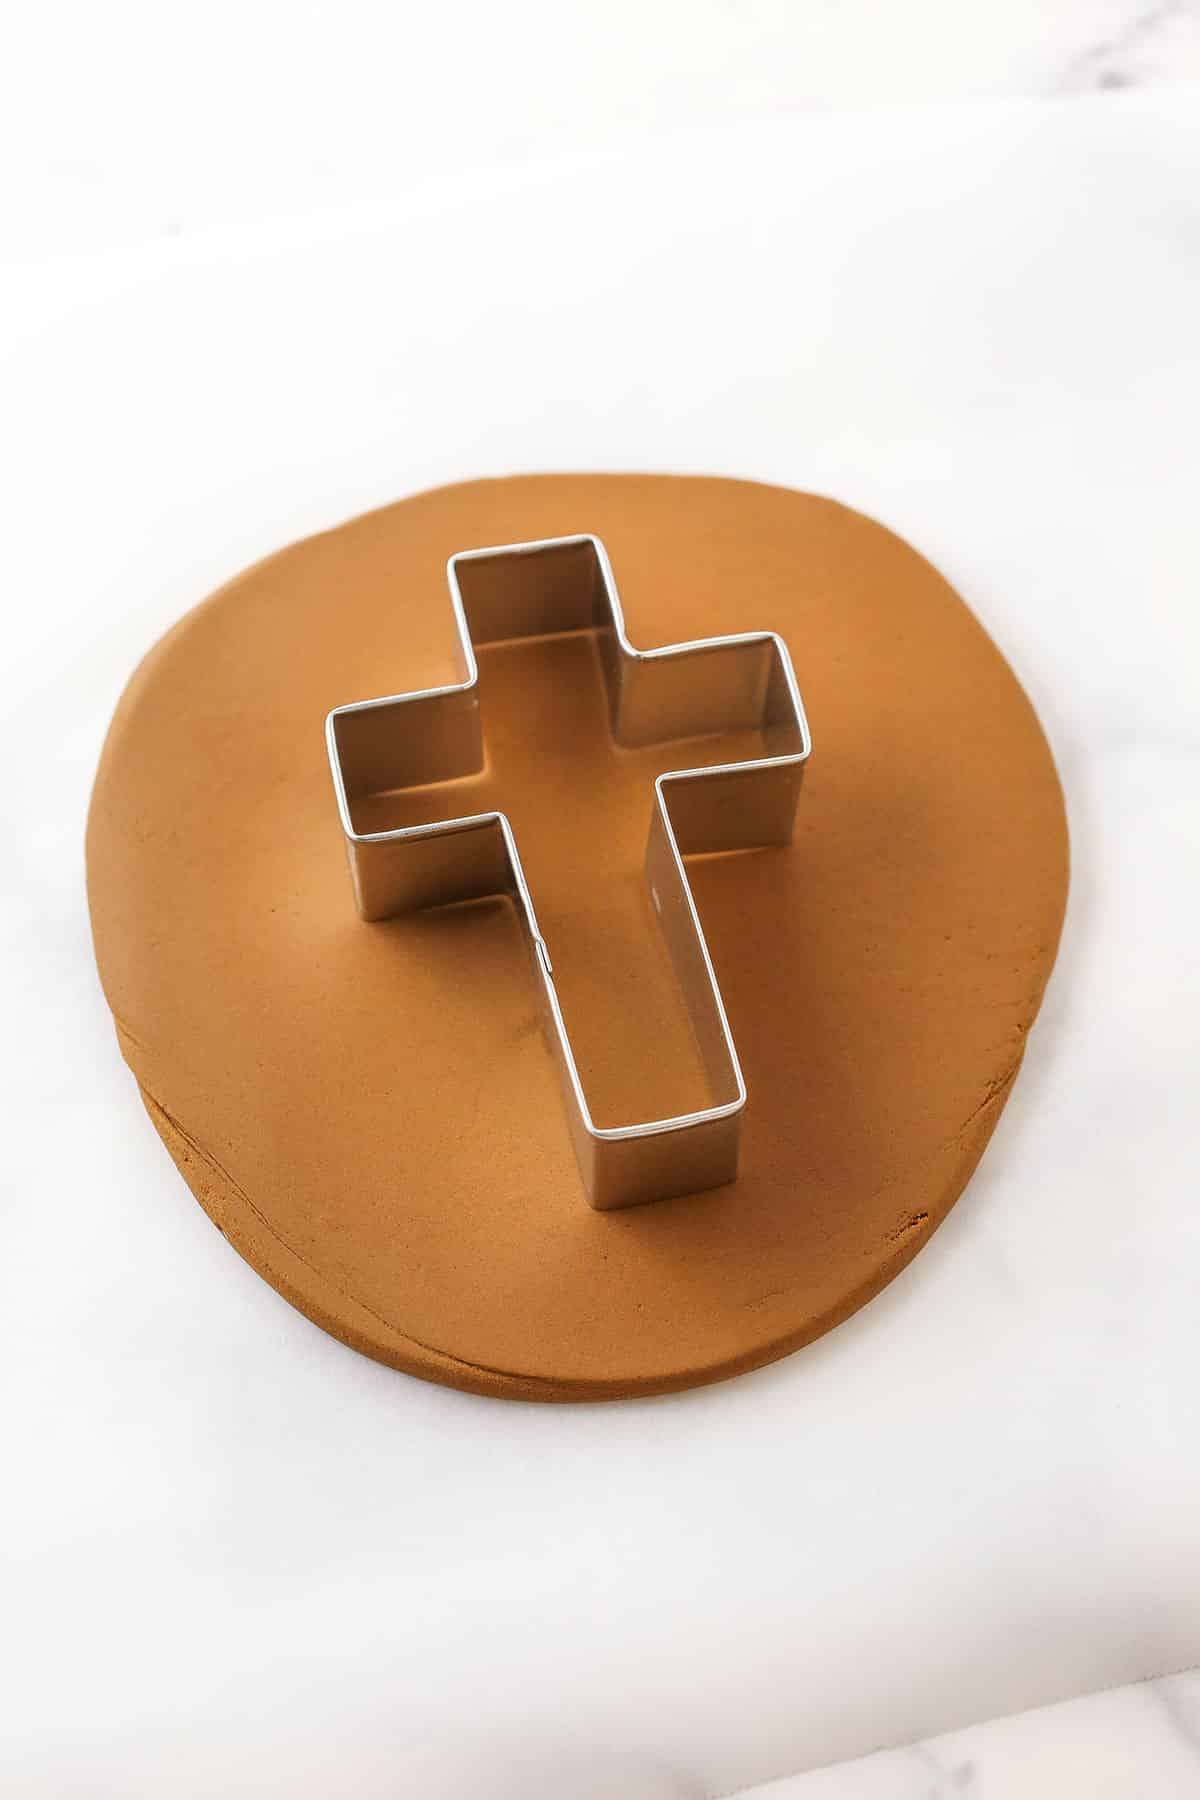 A step in making a Resurrection Cake showing how to make the cross using a cookie cutter